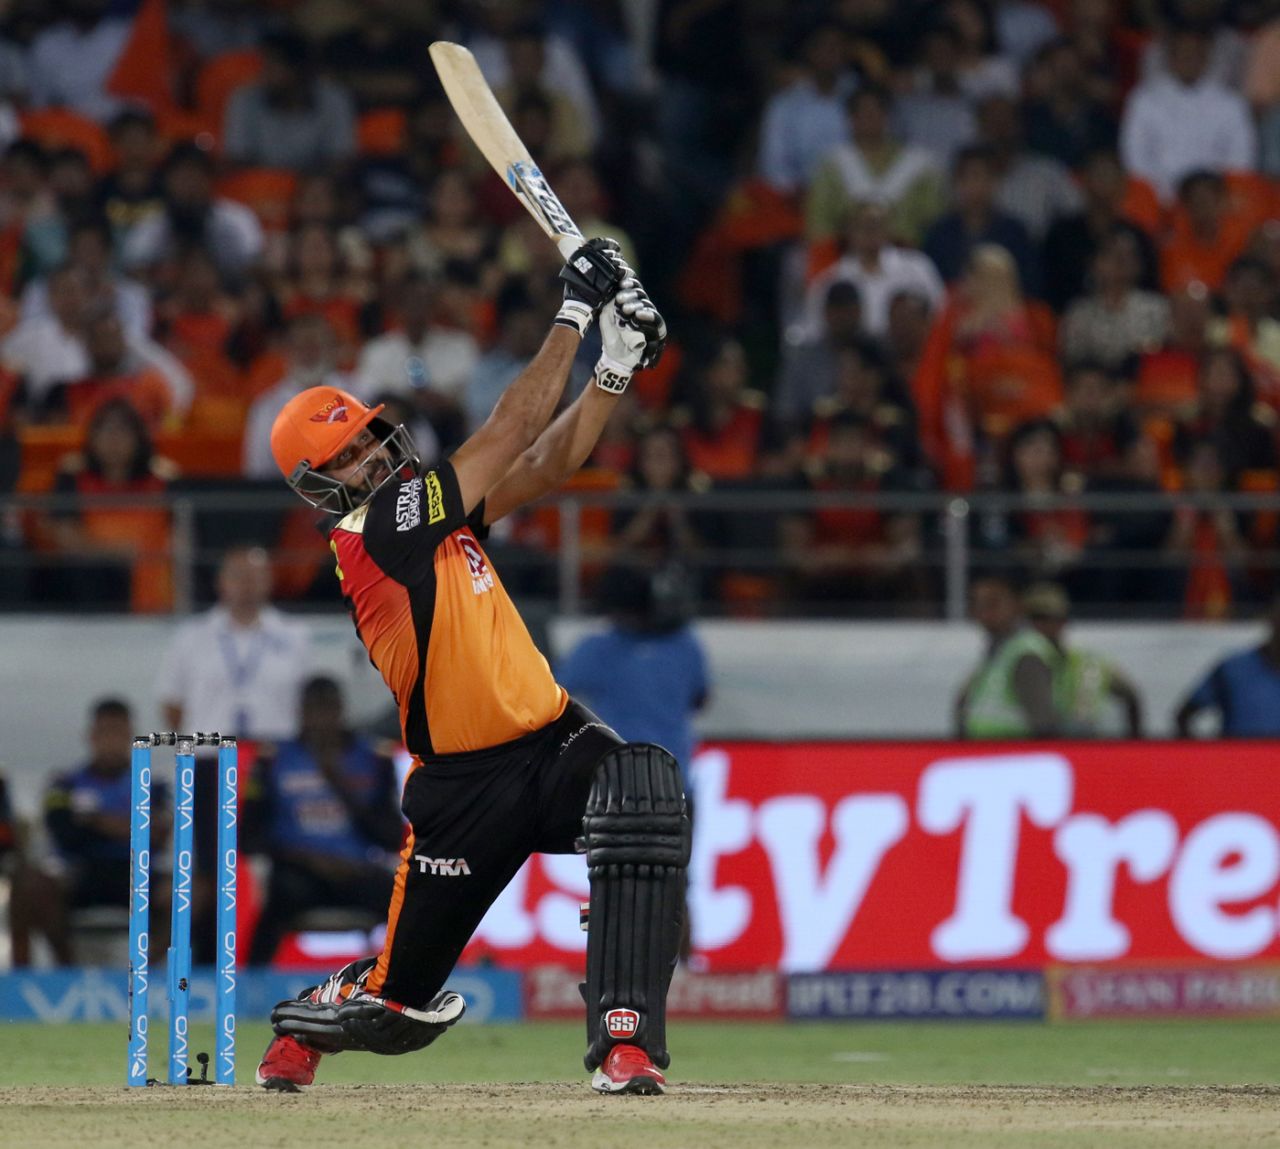 Yusuf Pathan launches one into the stands, Sunrisers Hyderabad v Delhi Daredevils, IPL 2018, Hyderabad, May 5, 2018